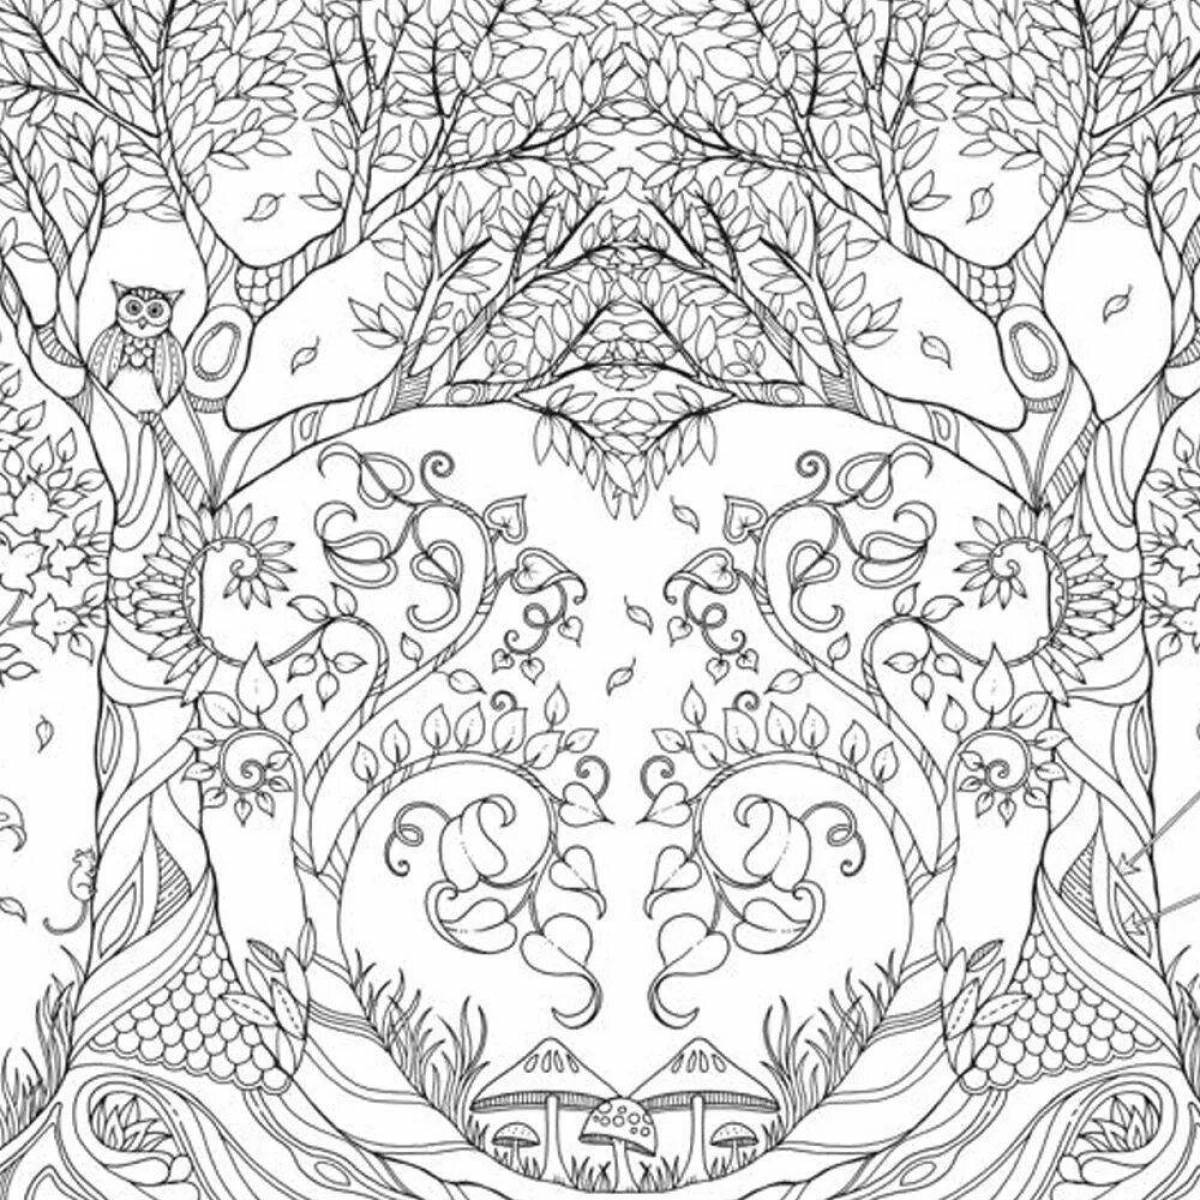 Awesome garden coloring page